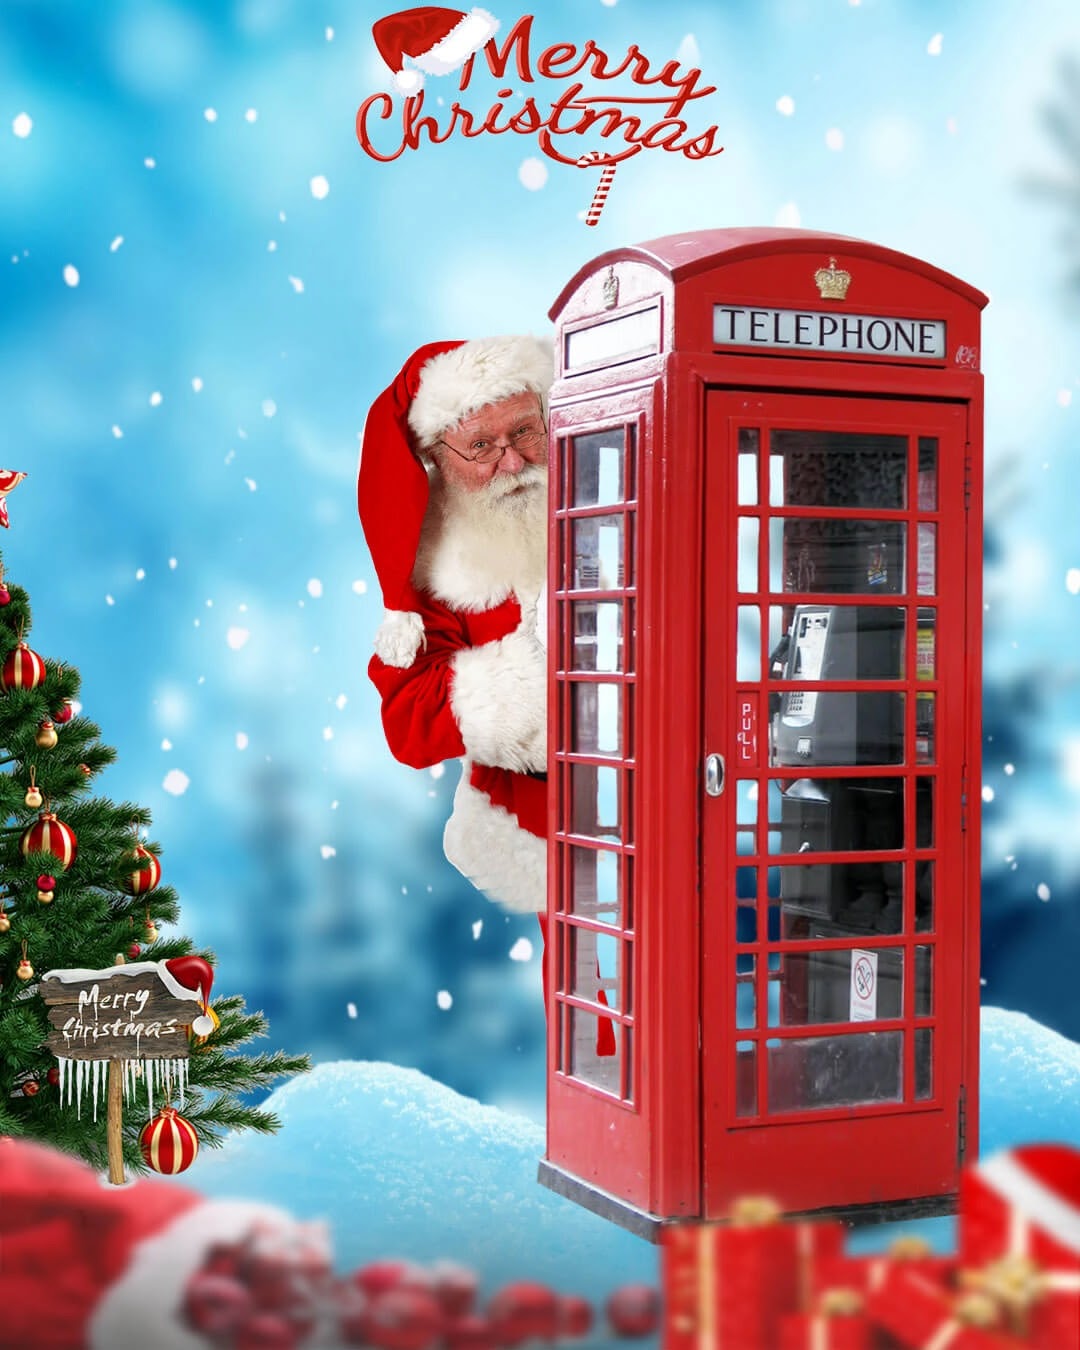 500+ Merry Christmas Hd Background Images for Editing Picsart AJ editing zone